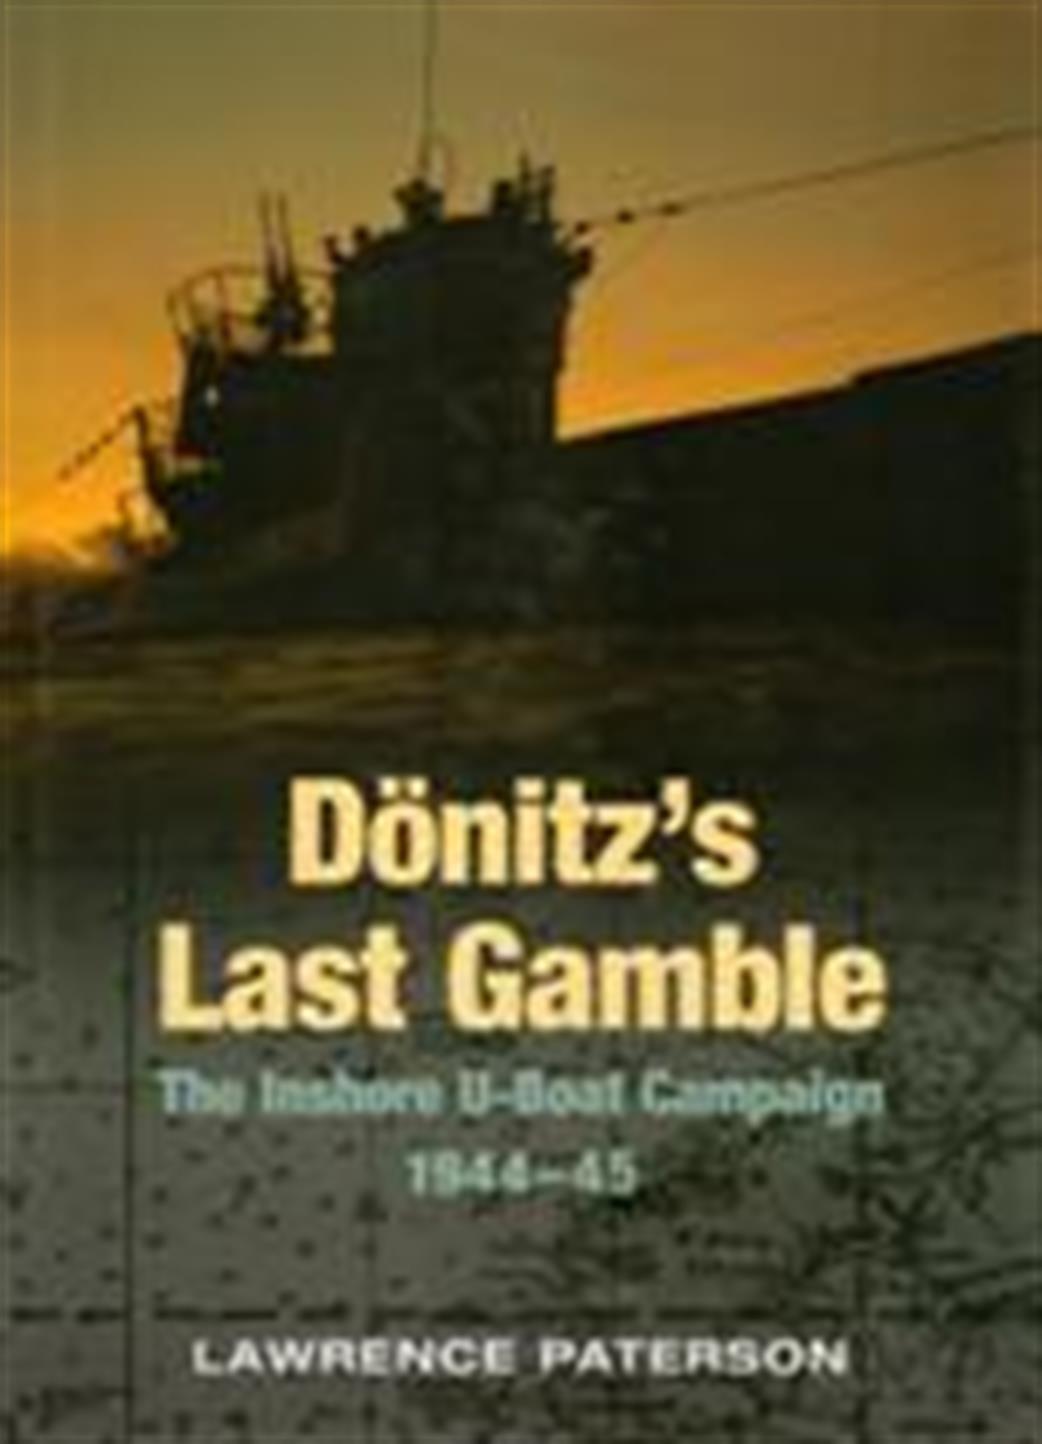 978-1-84415-714-3 Donitz's Last Gamble by Lawrence Paterson